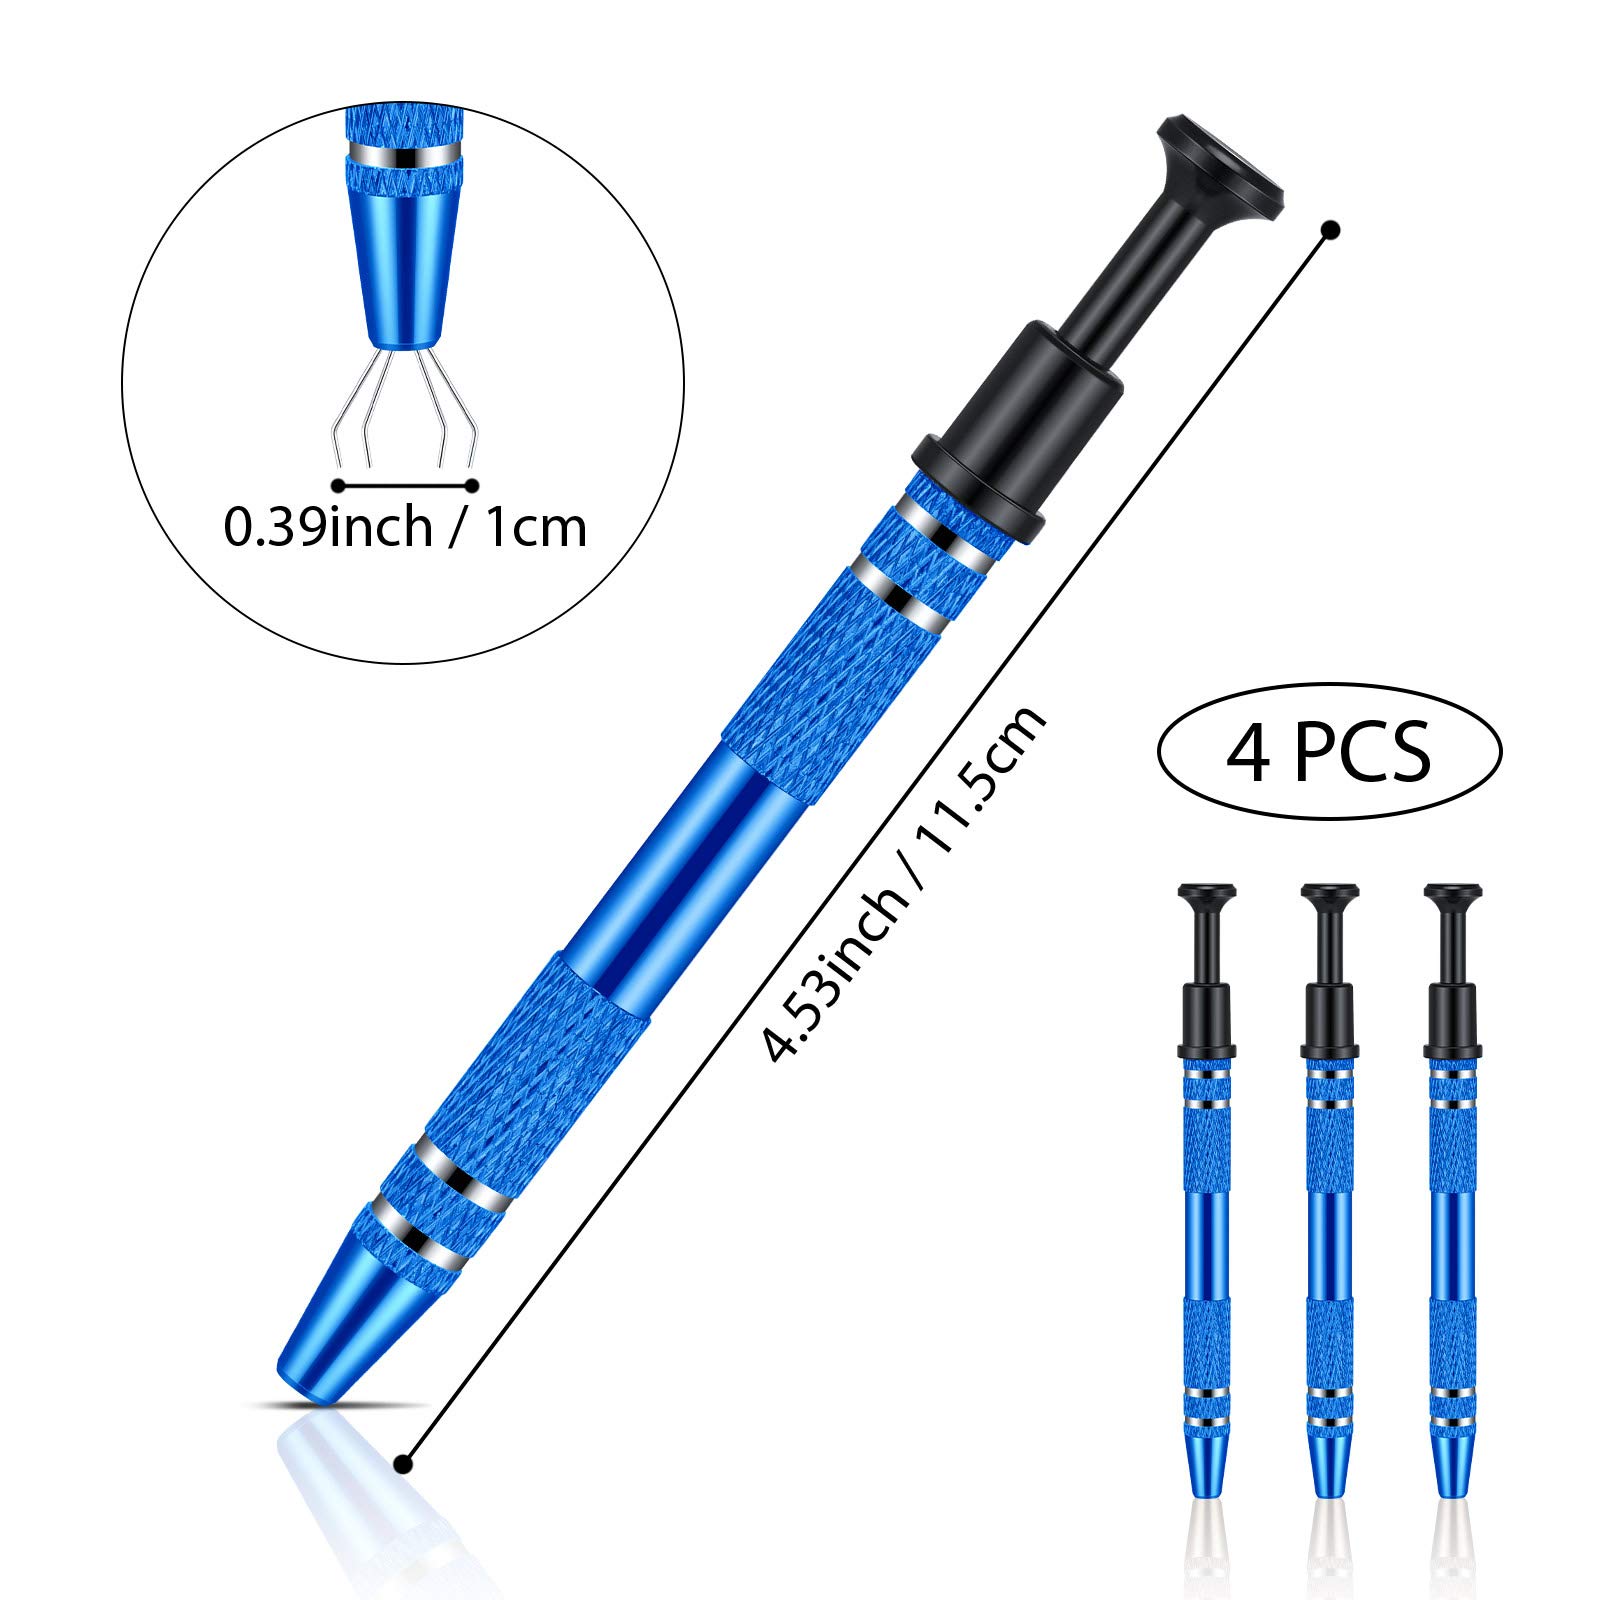 4 Pieces 4 Prongs Diamond Claw Tweezers Terp Pearl Grabber Standard Pick-up Tool 4 Prongs Grabber IC Chip Metal Grabber Grabber Stainless Steel 4-Claw Pick up Tool (Blue)